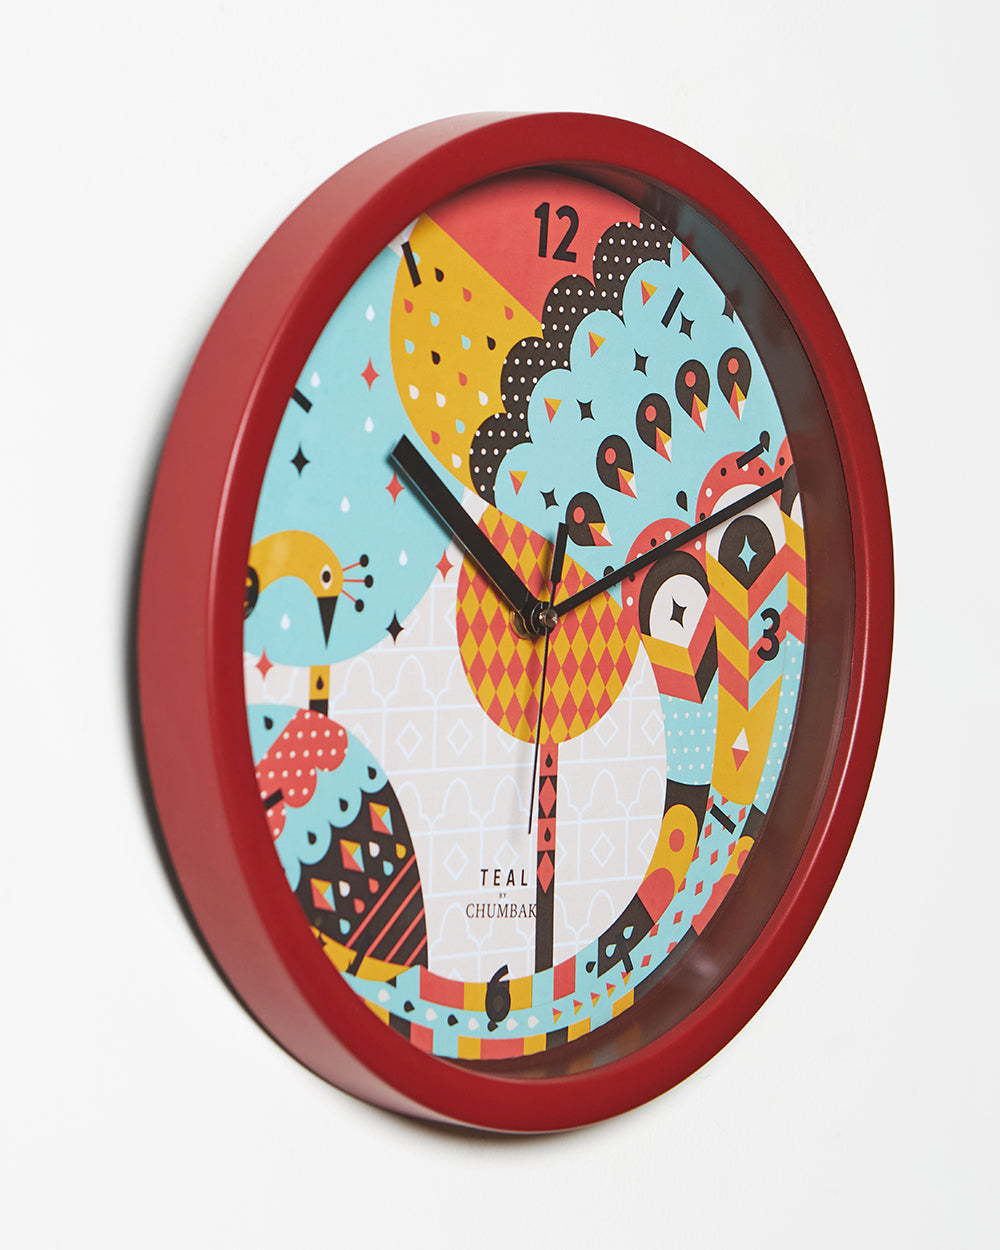 Teal by Chumbak |Peacock Pride Wall Clock | 11 inch